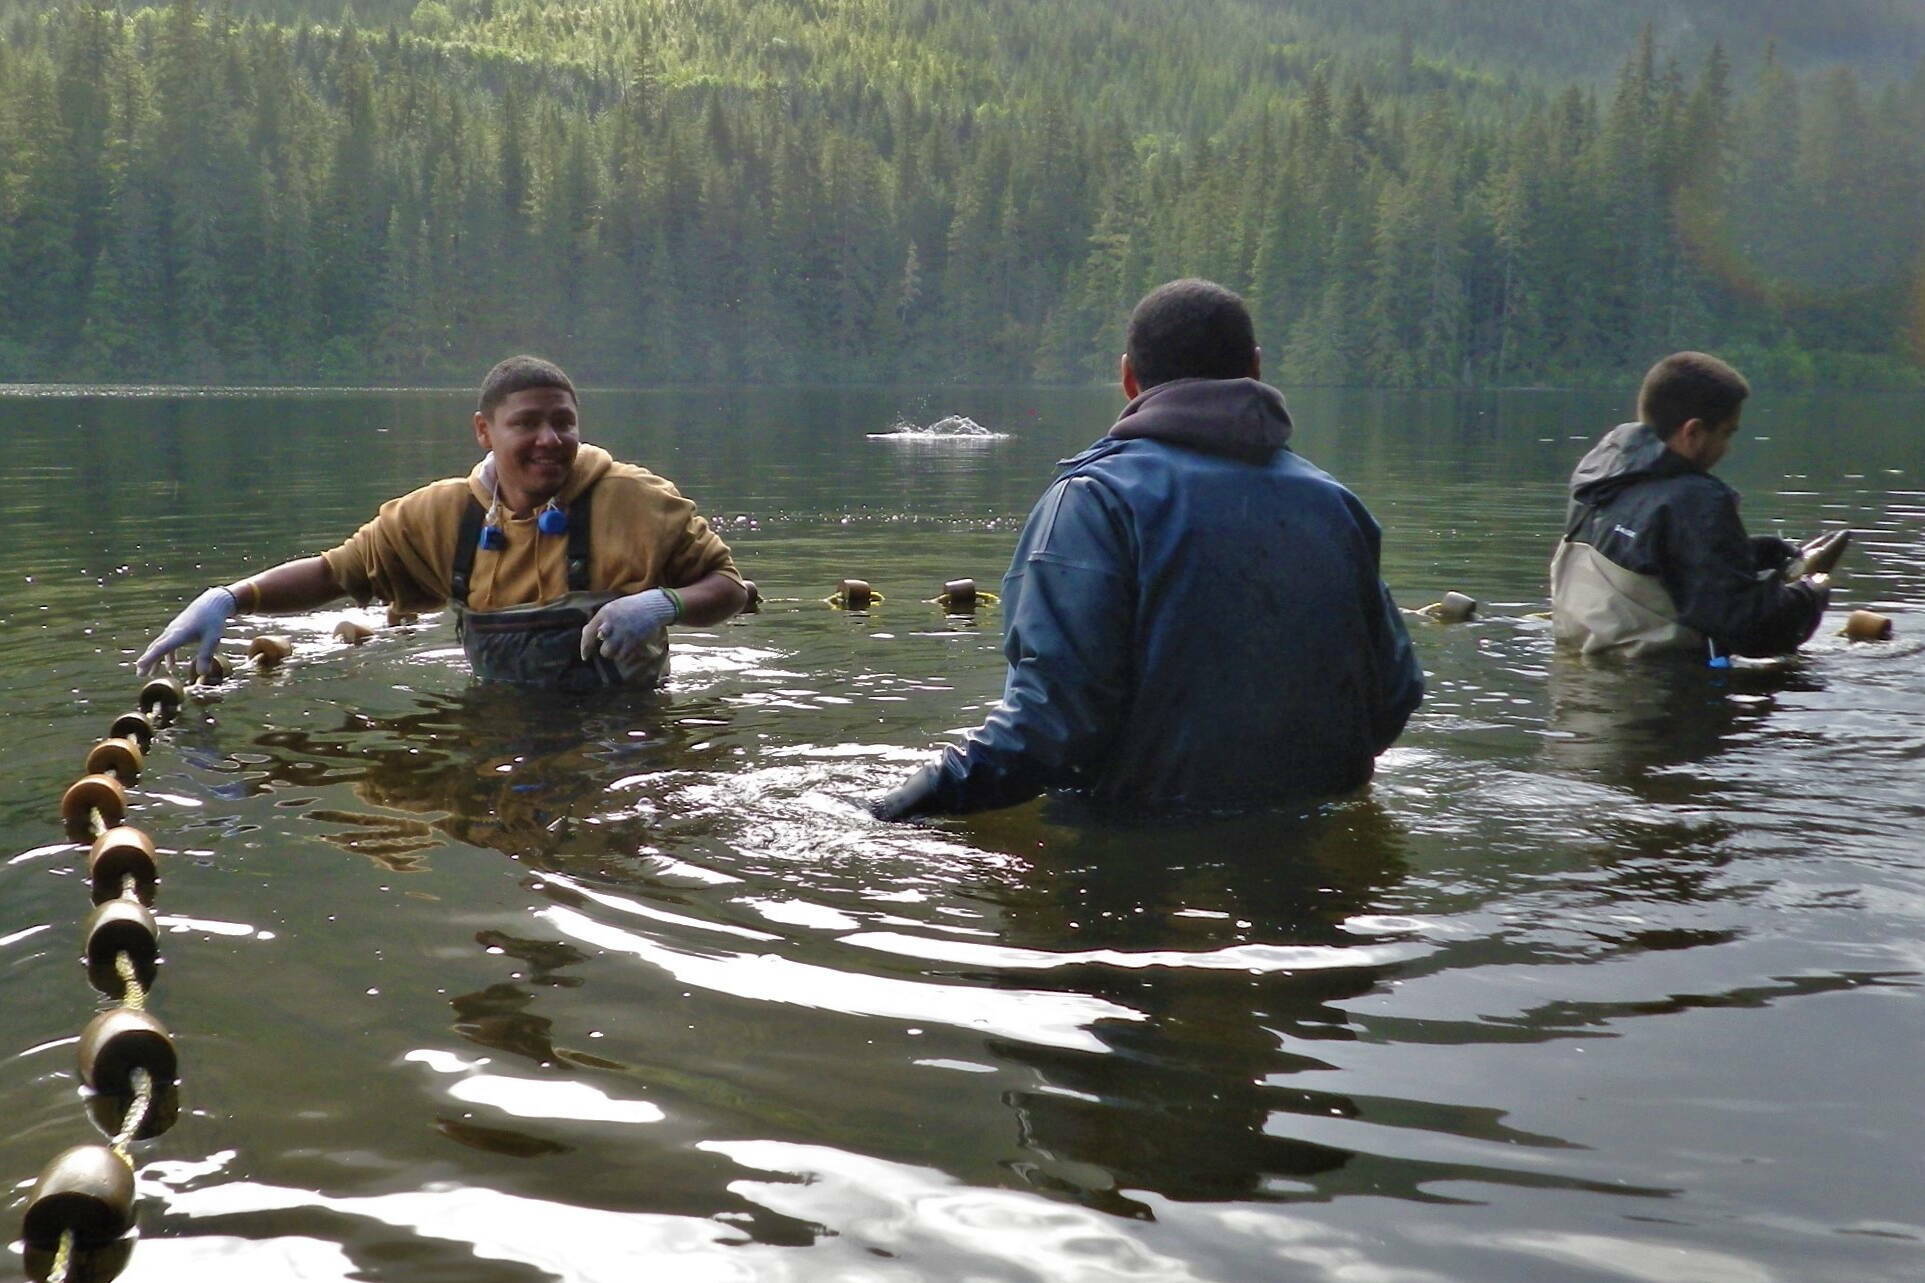 Fishers set out equipment a short distance from shore in the Tongass National Forest. A collective $110 million in public investment for mariculture in Alaska is occurring via federal and other funding. (Courtesy Photo/U.S. Forest Service)